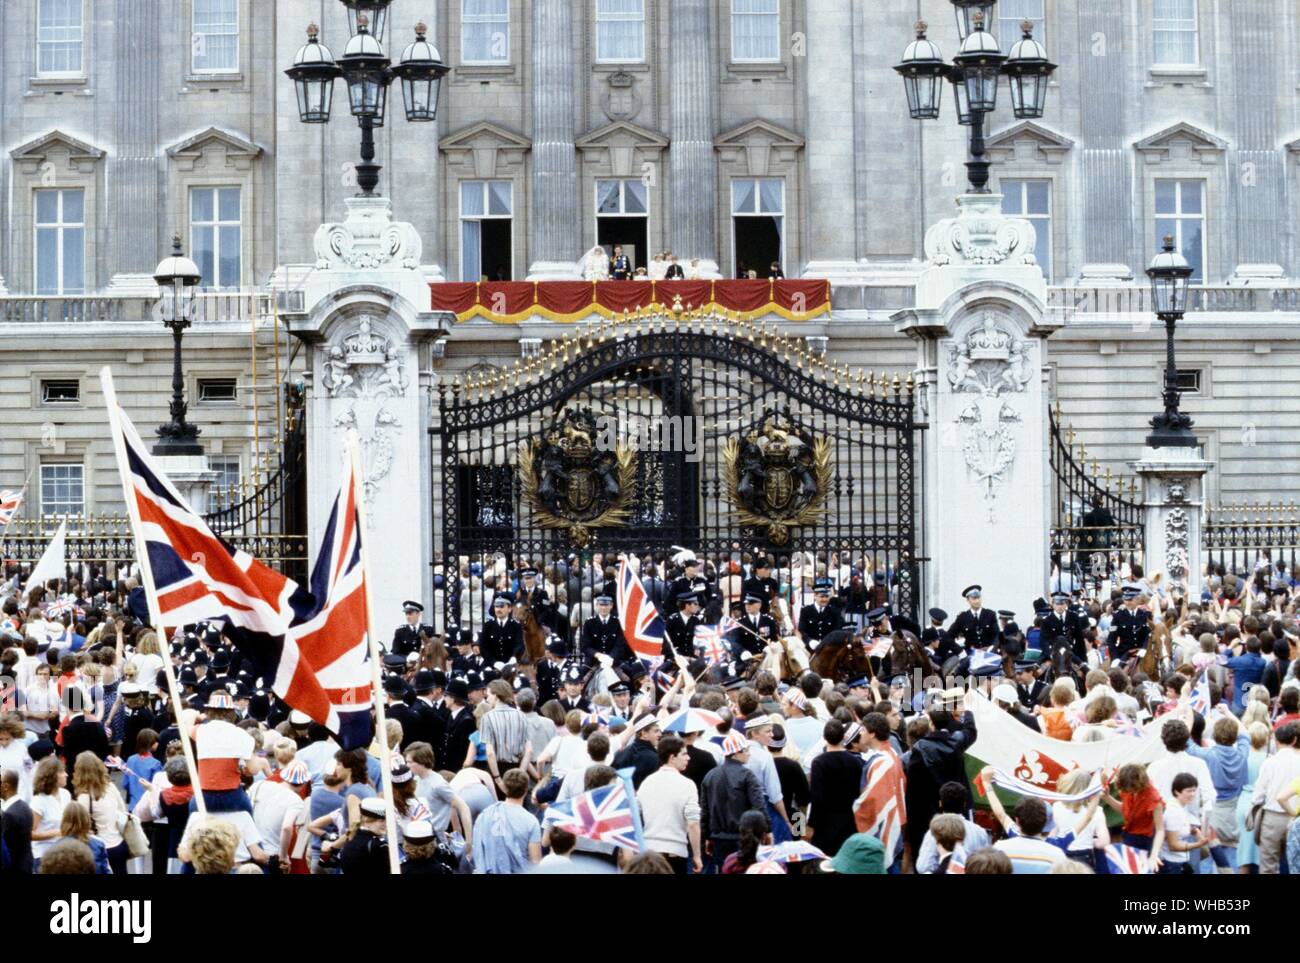 Crowds of wellwishers outside Buckingham Palace gates wait to see Prince Charles and Lady Diana Spencer on their wedding day 29 July 1981. Stock Photo